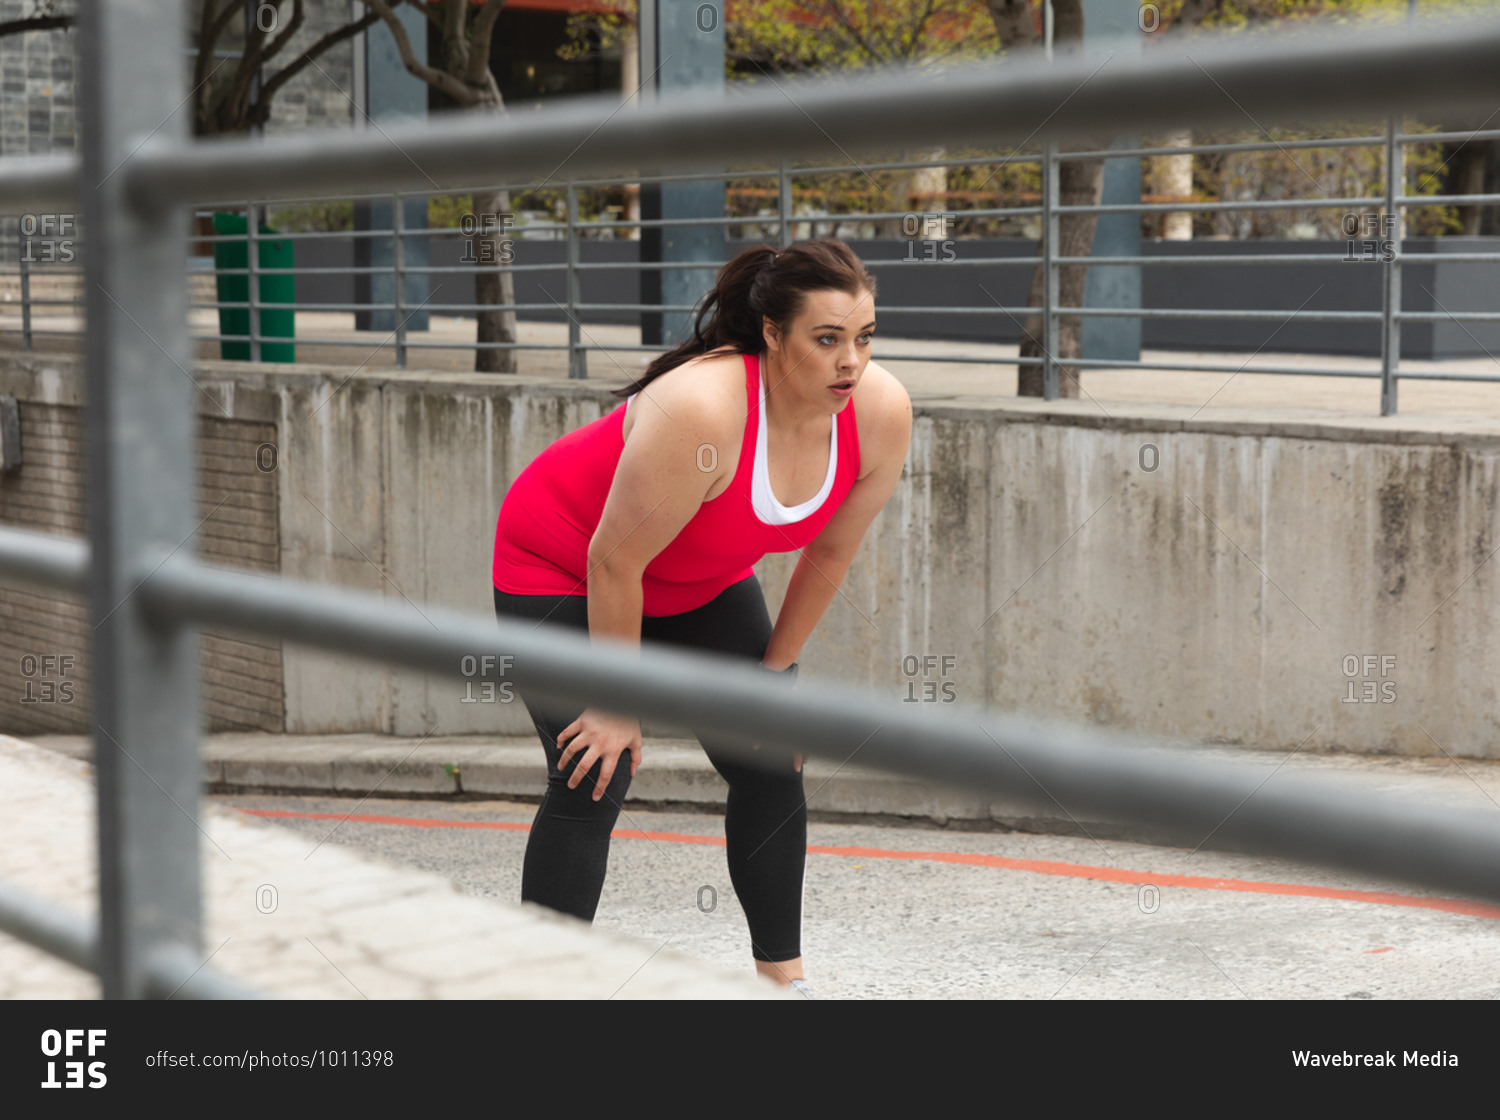 Curvy Caucasian woman with long dark hair wearing sports clothes exercising in a city, leaning forward to take a rest during her work out, with modern buildings in the background